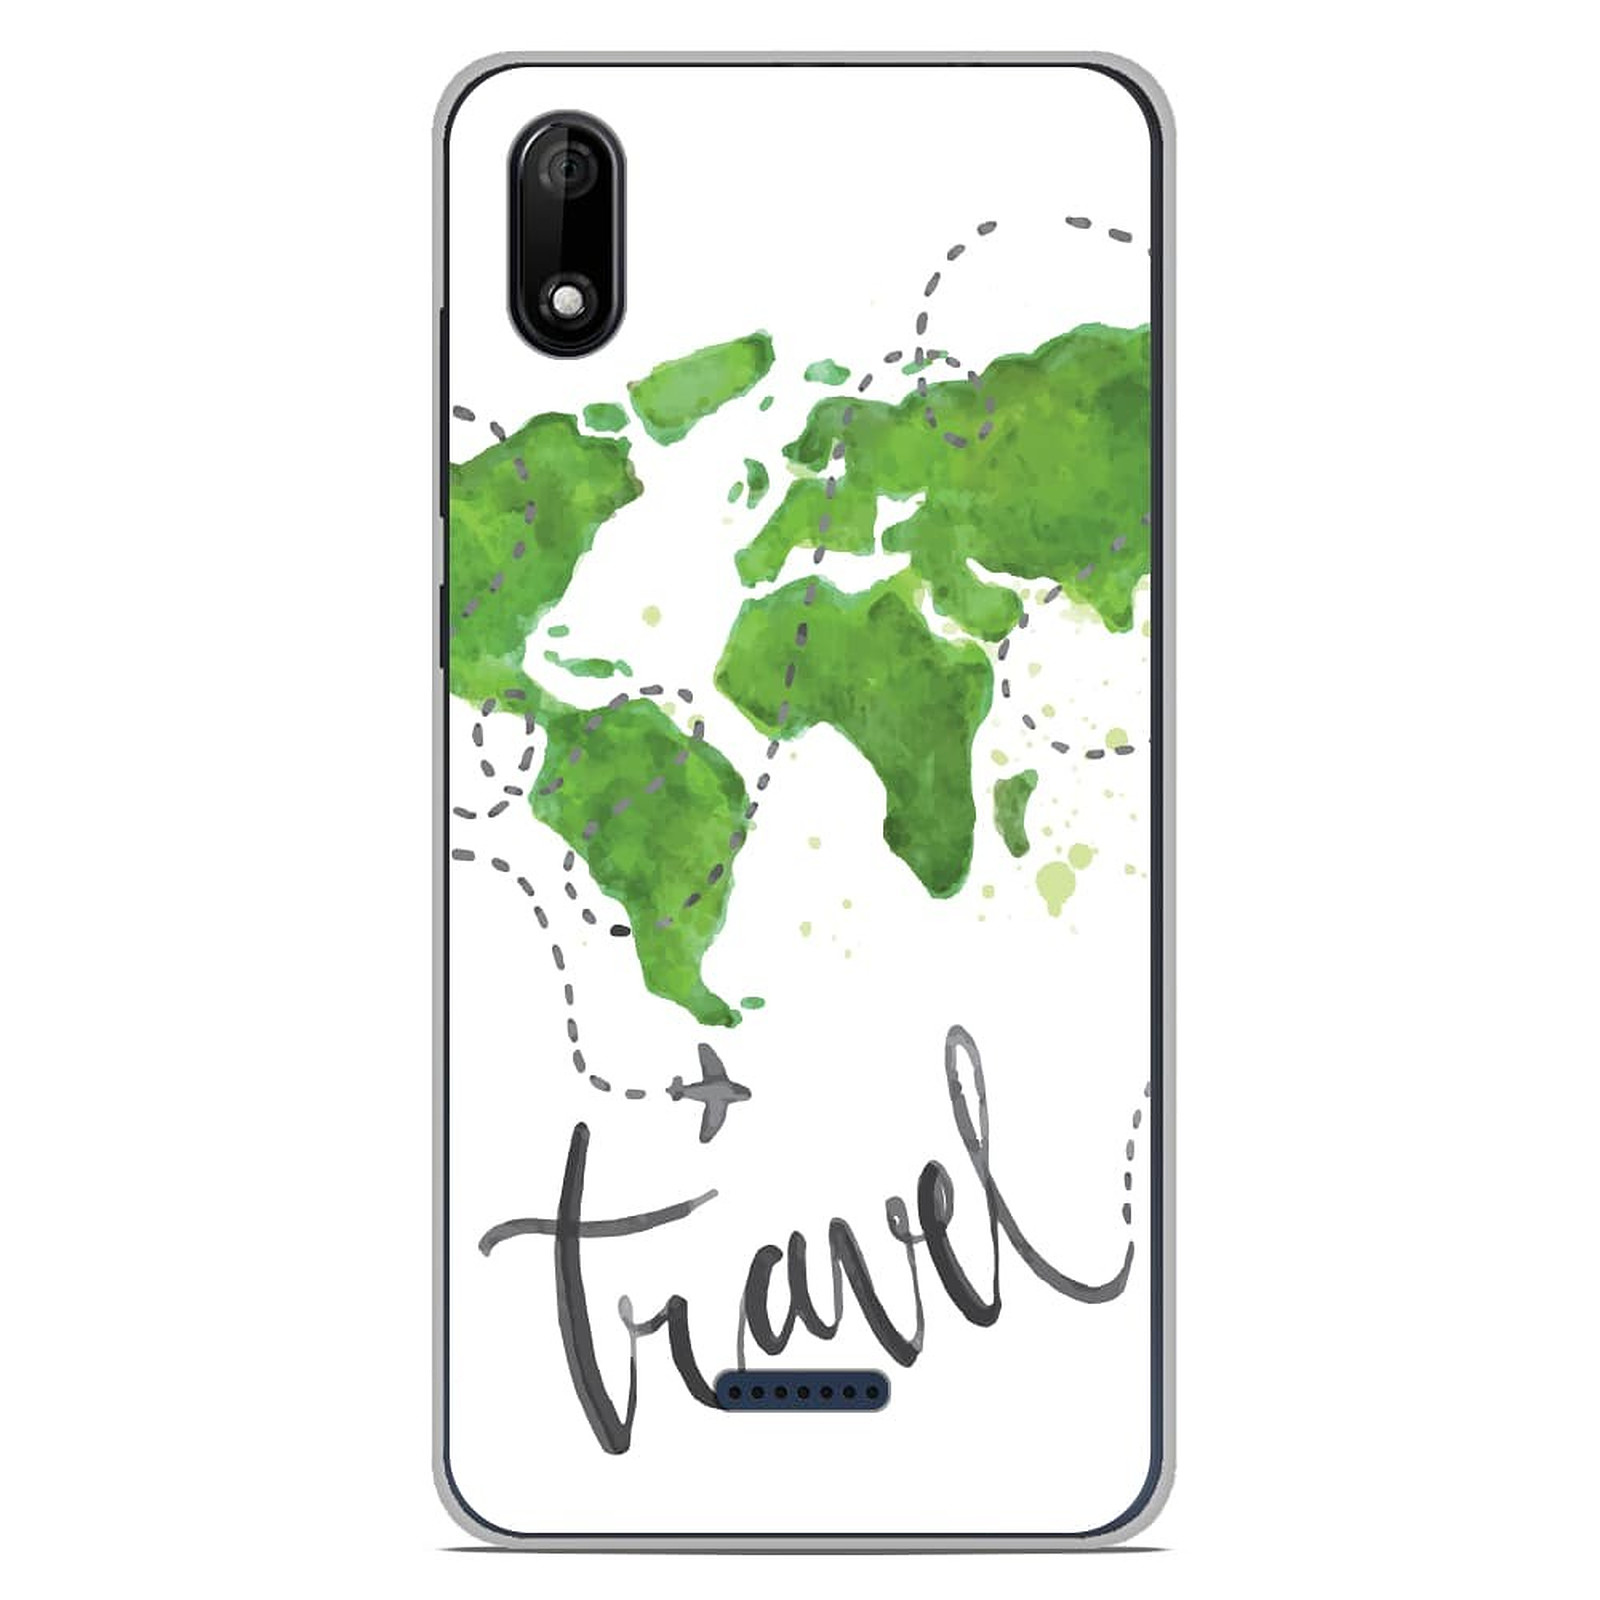 1001 Coques Coque silicone gel Wiko Y50 motif Map Travel - Coque telephone 1001Coques